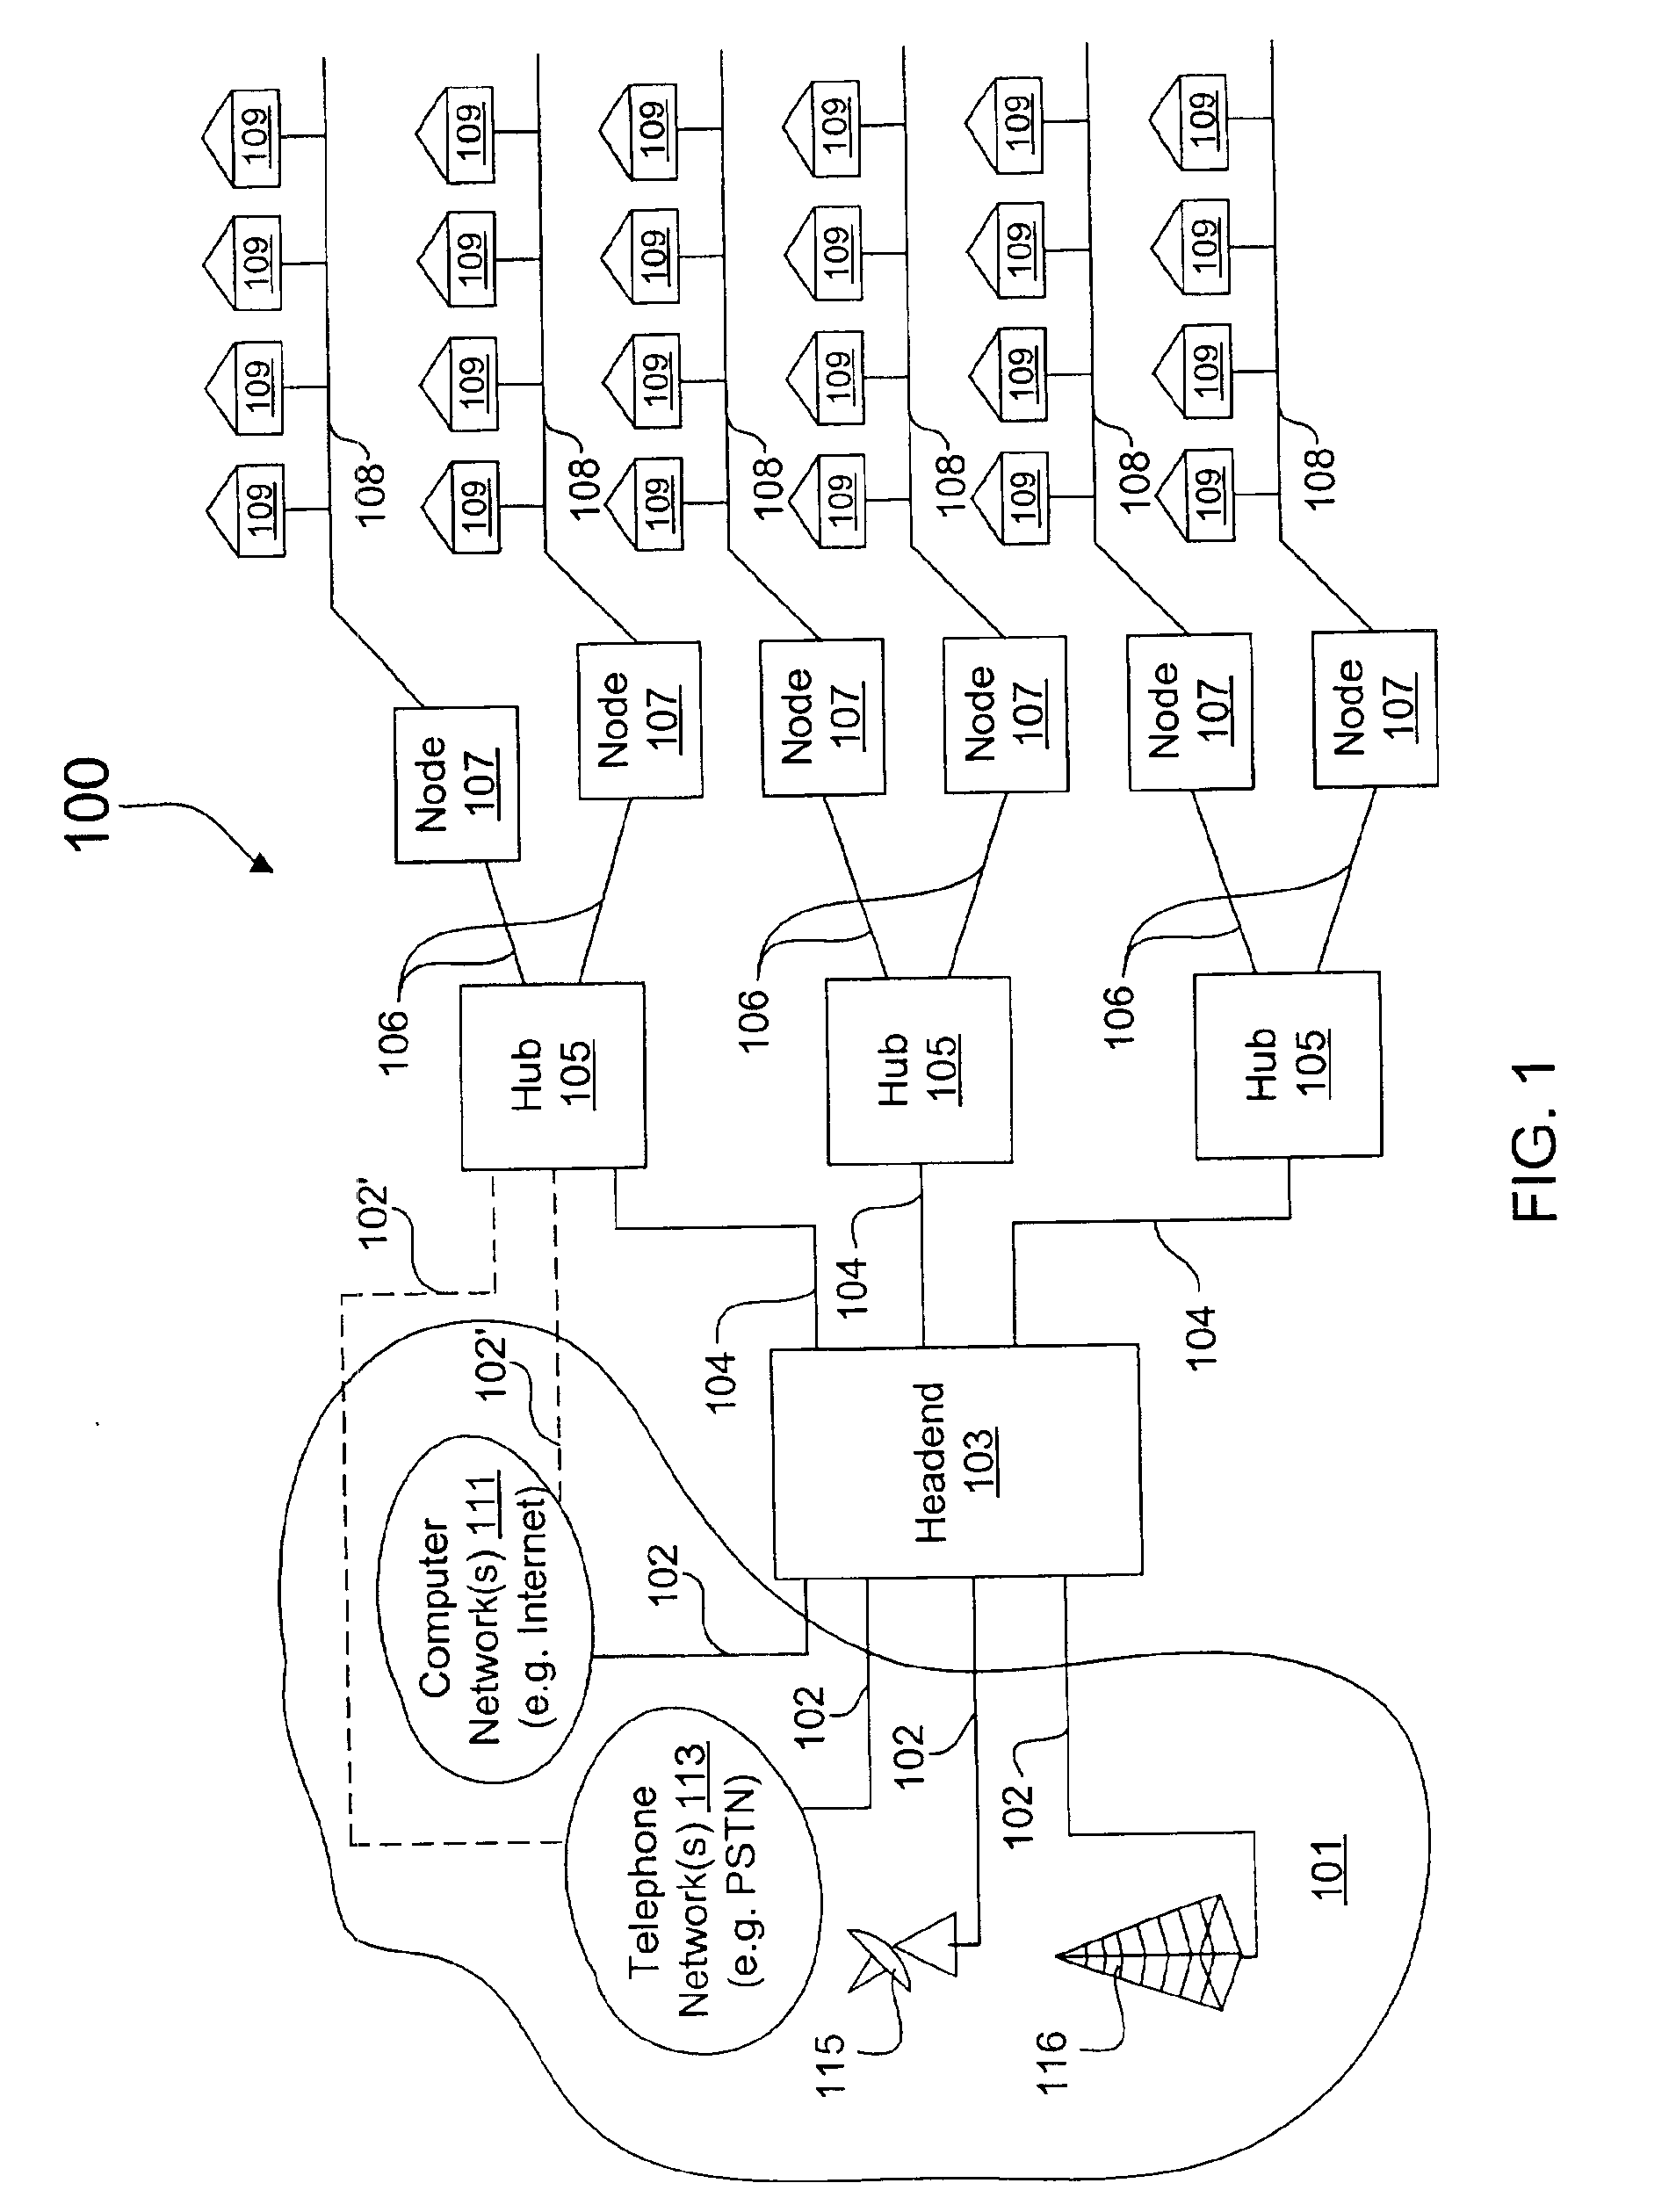 Time division multiple access over broadband modulation method and apparatus